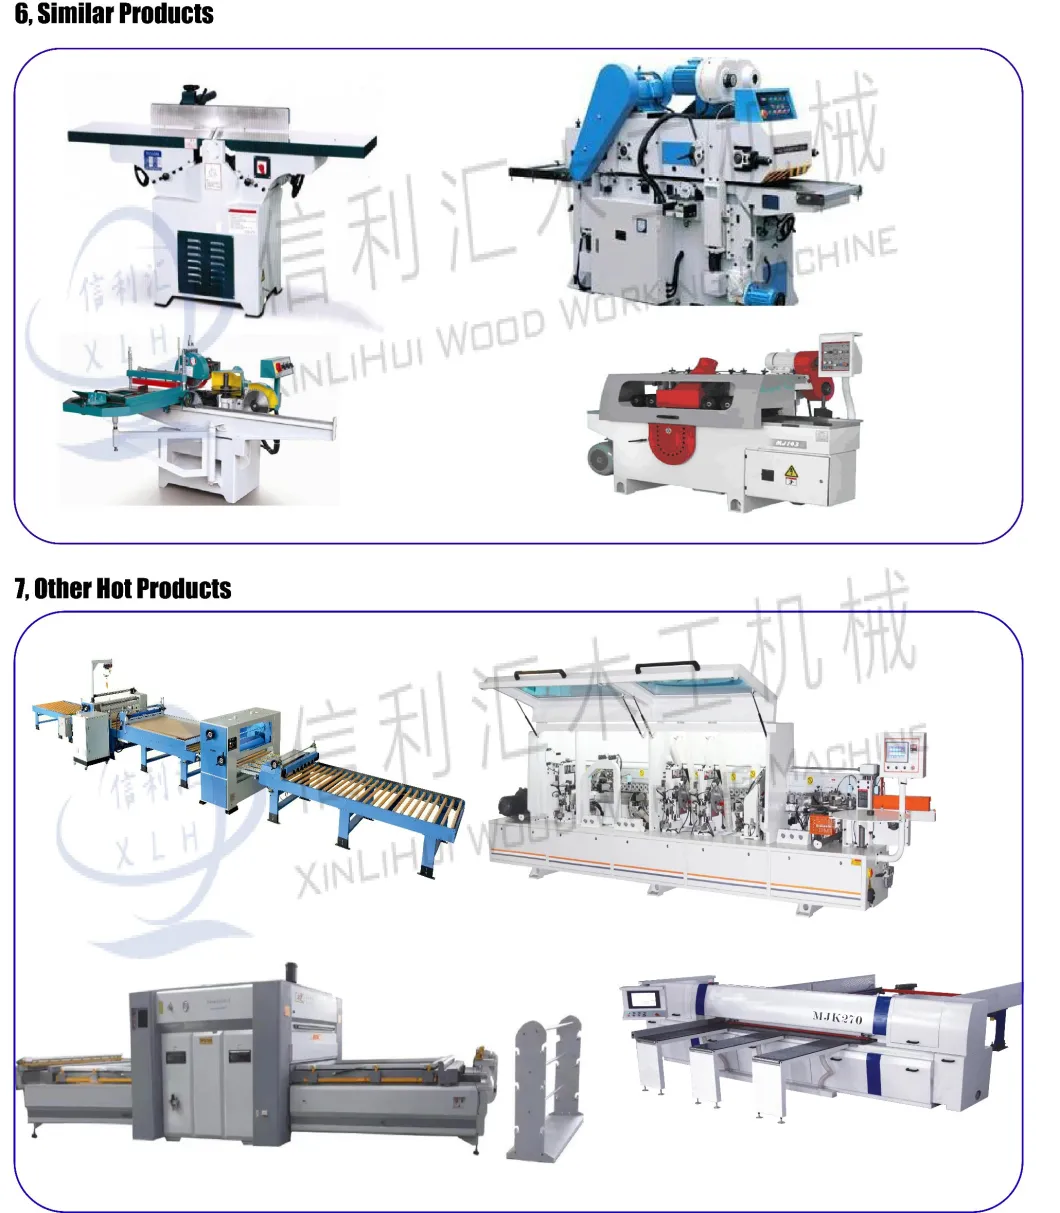 The Wooden Pallet Automatic Slotting Machine Process of Making Wooden Strips/Strips and Trenching in The Production Process of American Wooden Pallets;